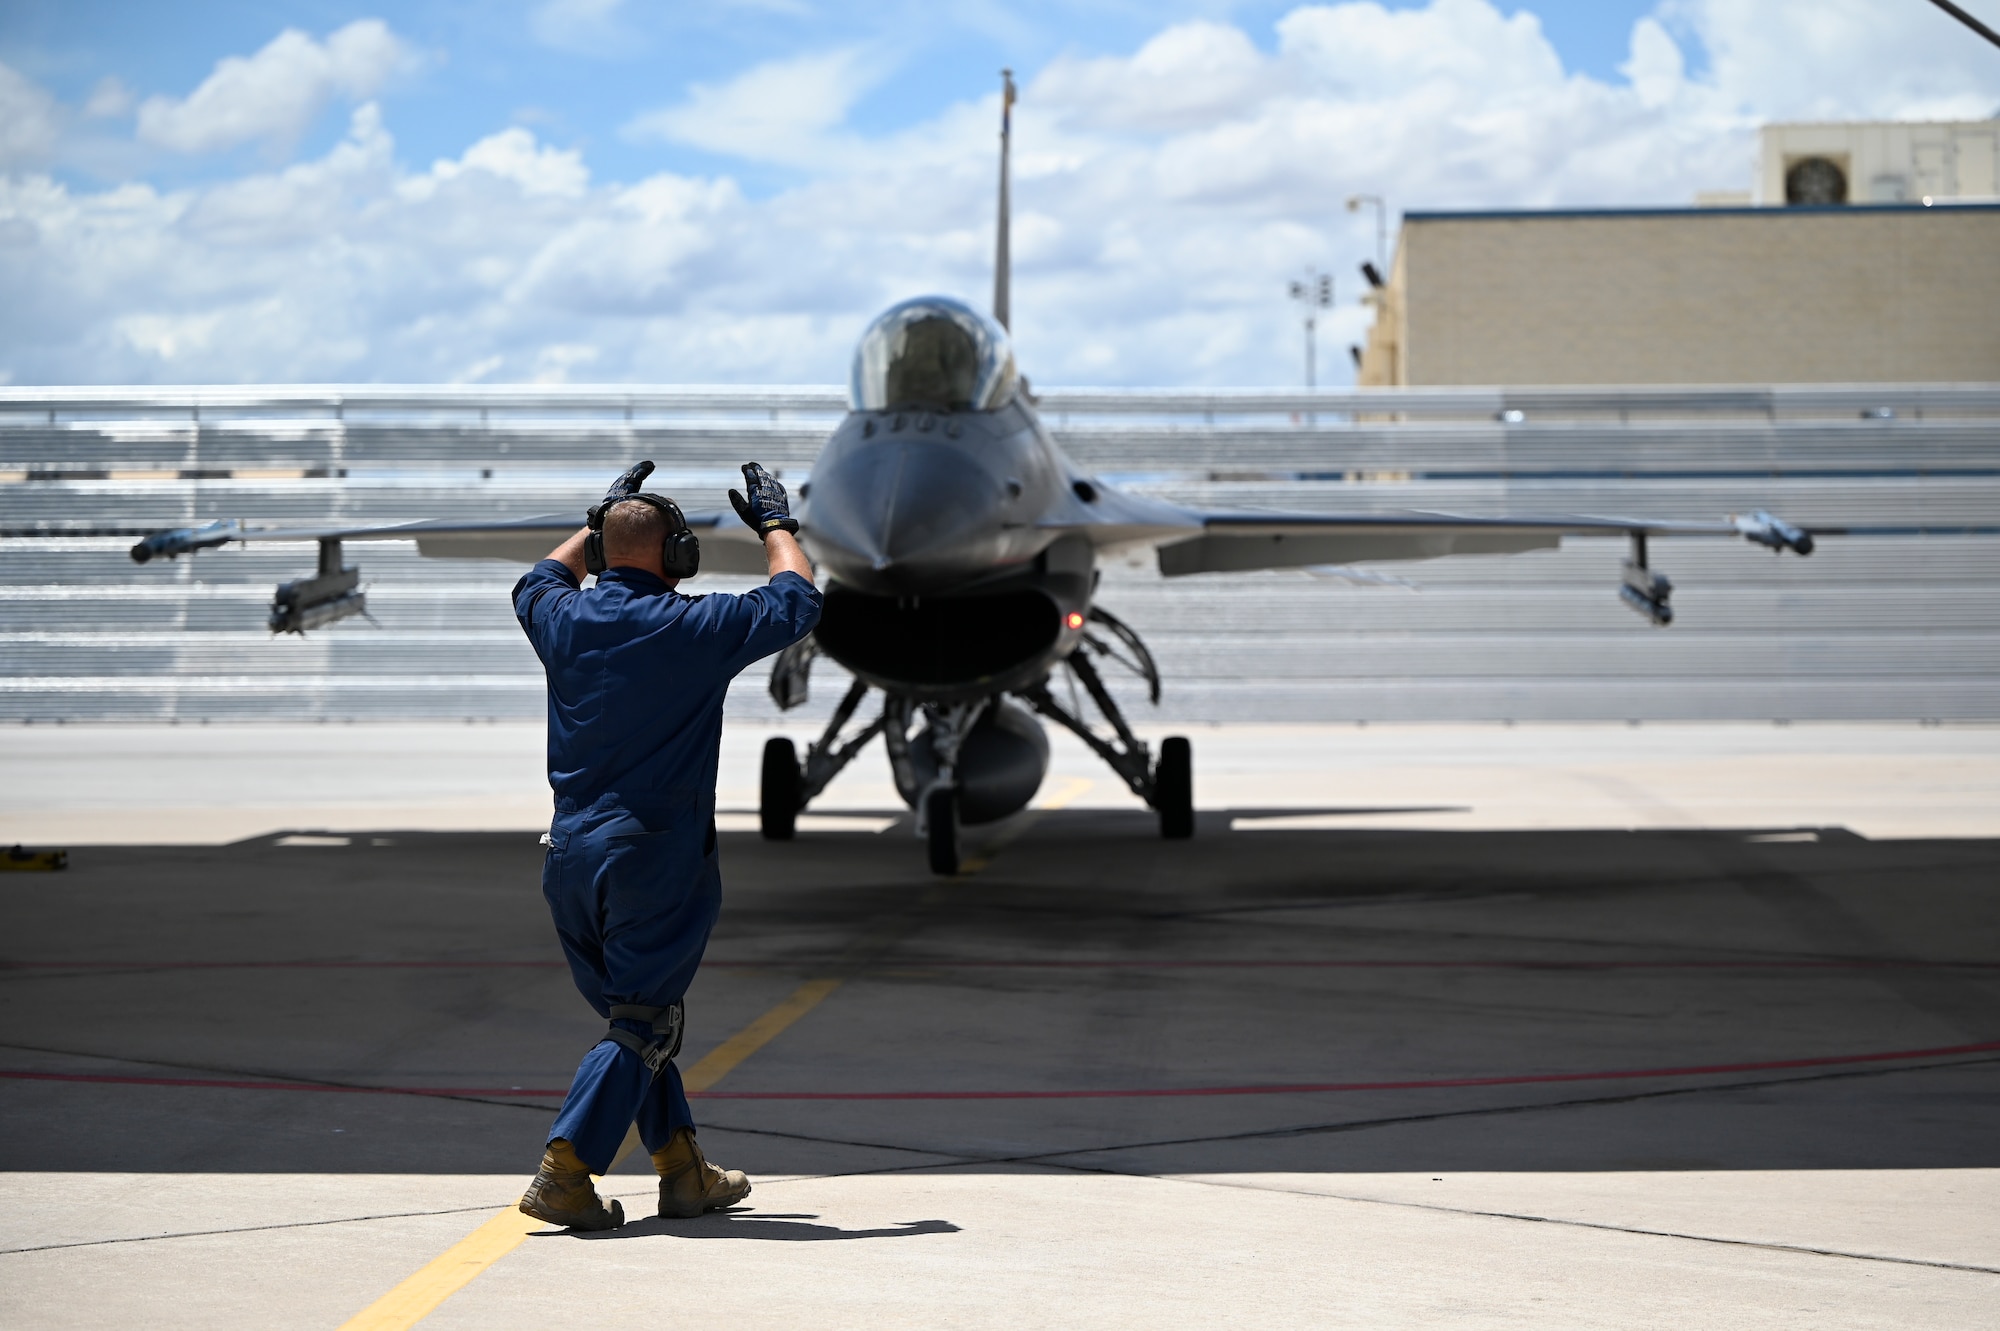 An F-16 crew chief from the 162nd Wing at Morris Air National Guard Base in Tucson parks an F-16 for engine shutdown after its final flight today. The RNLAF has commenced transition from the F-16 to the F-35. (U.S. Air National Guard photo by Maj. Angela Walz)